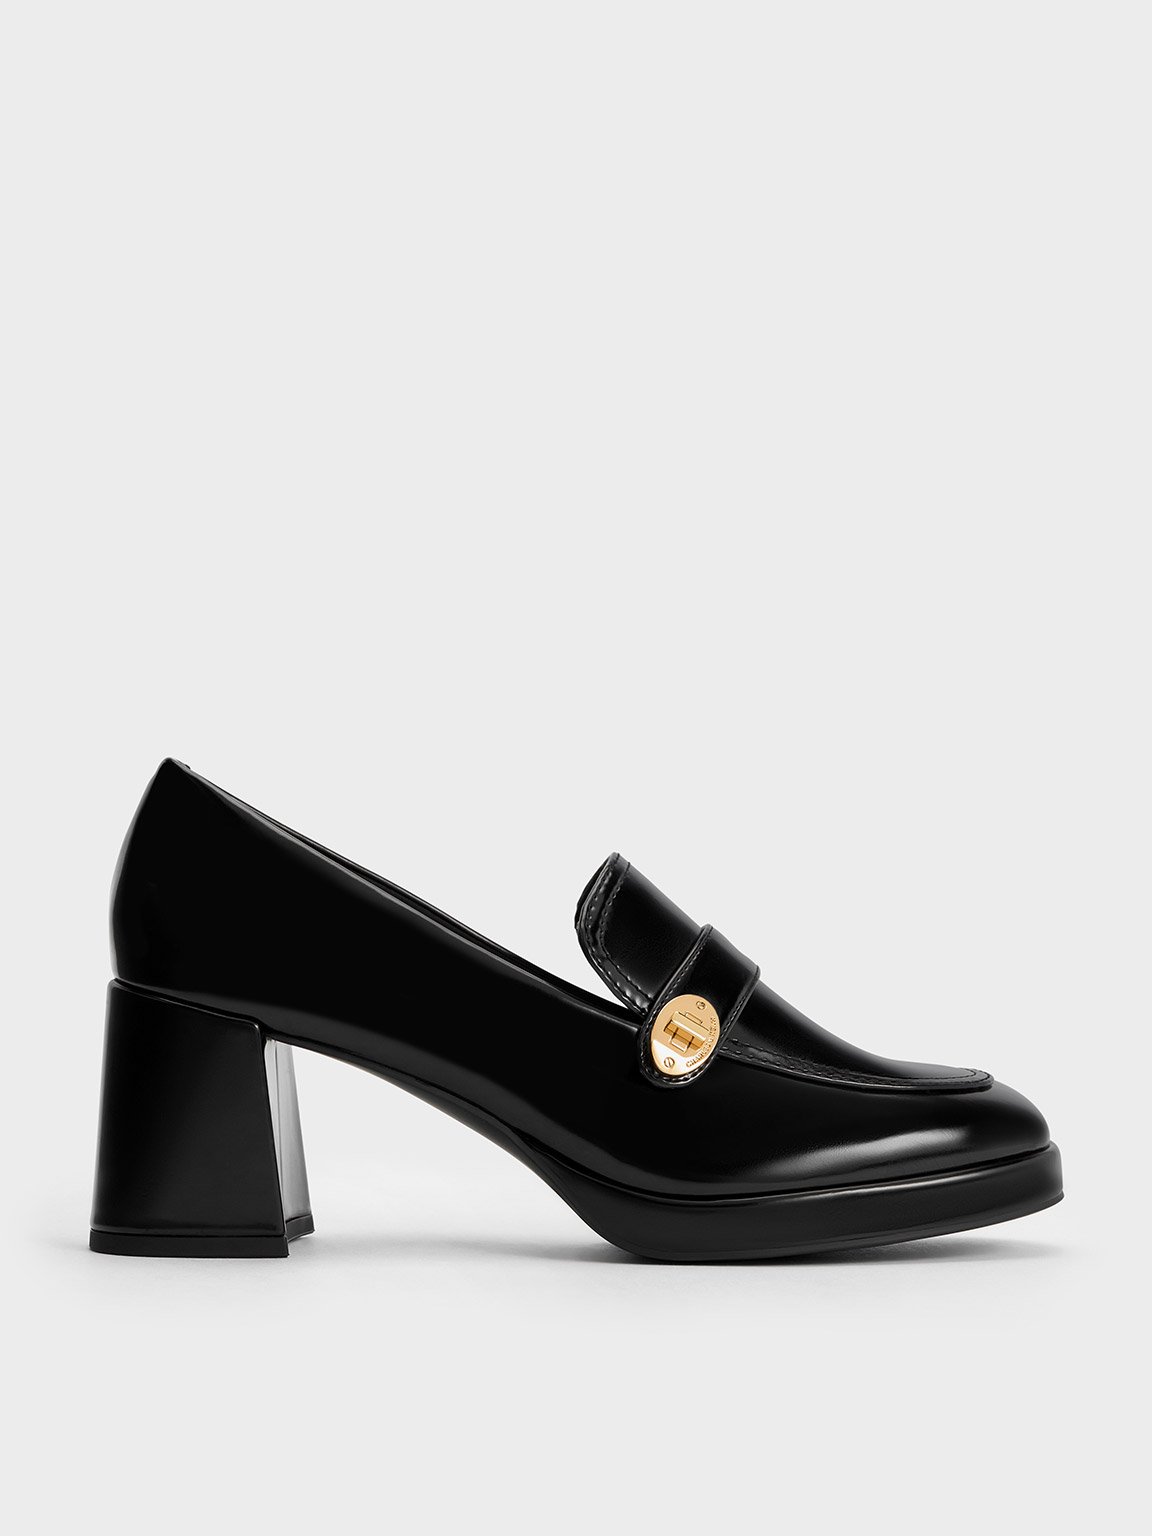 Black Box Metallic Accent Loafer Pumps - CHARLES & KEITH SG